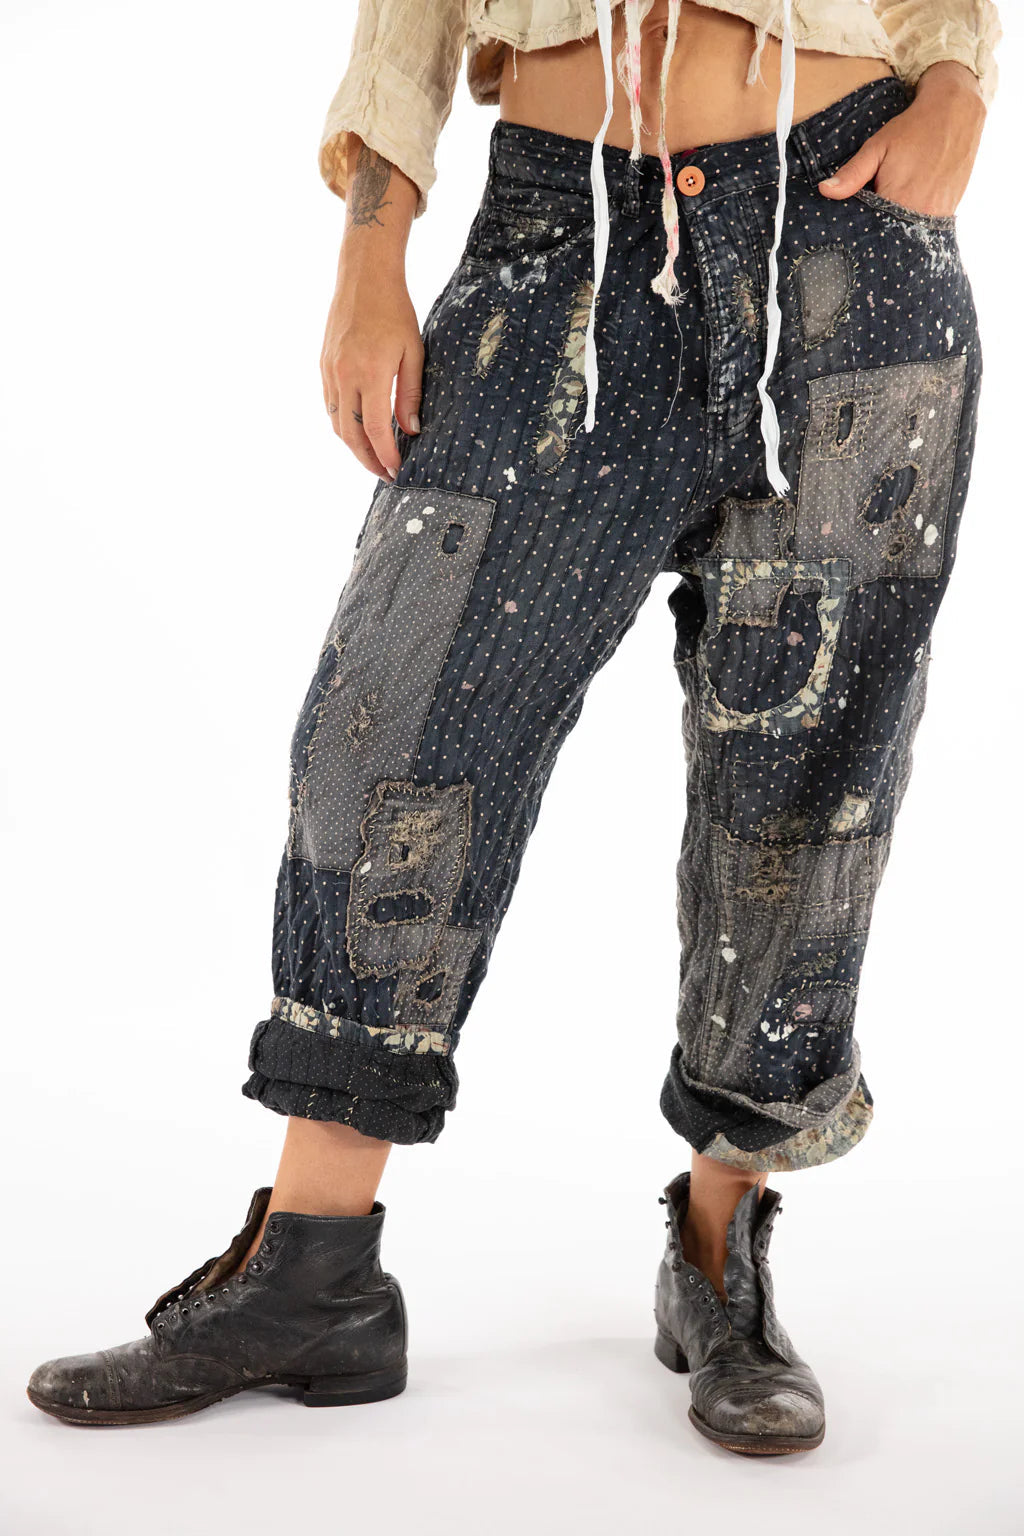 Dot and Floral Miners Pants 495